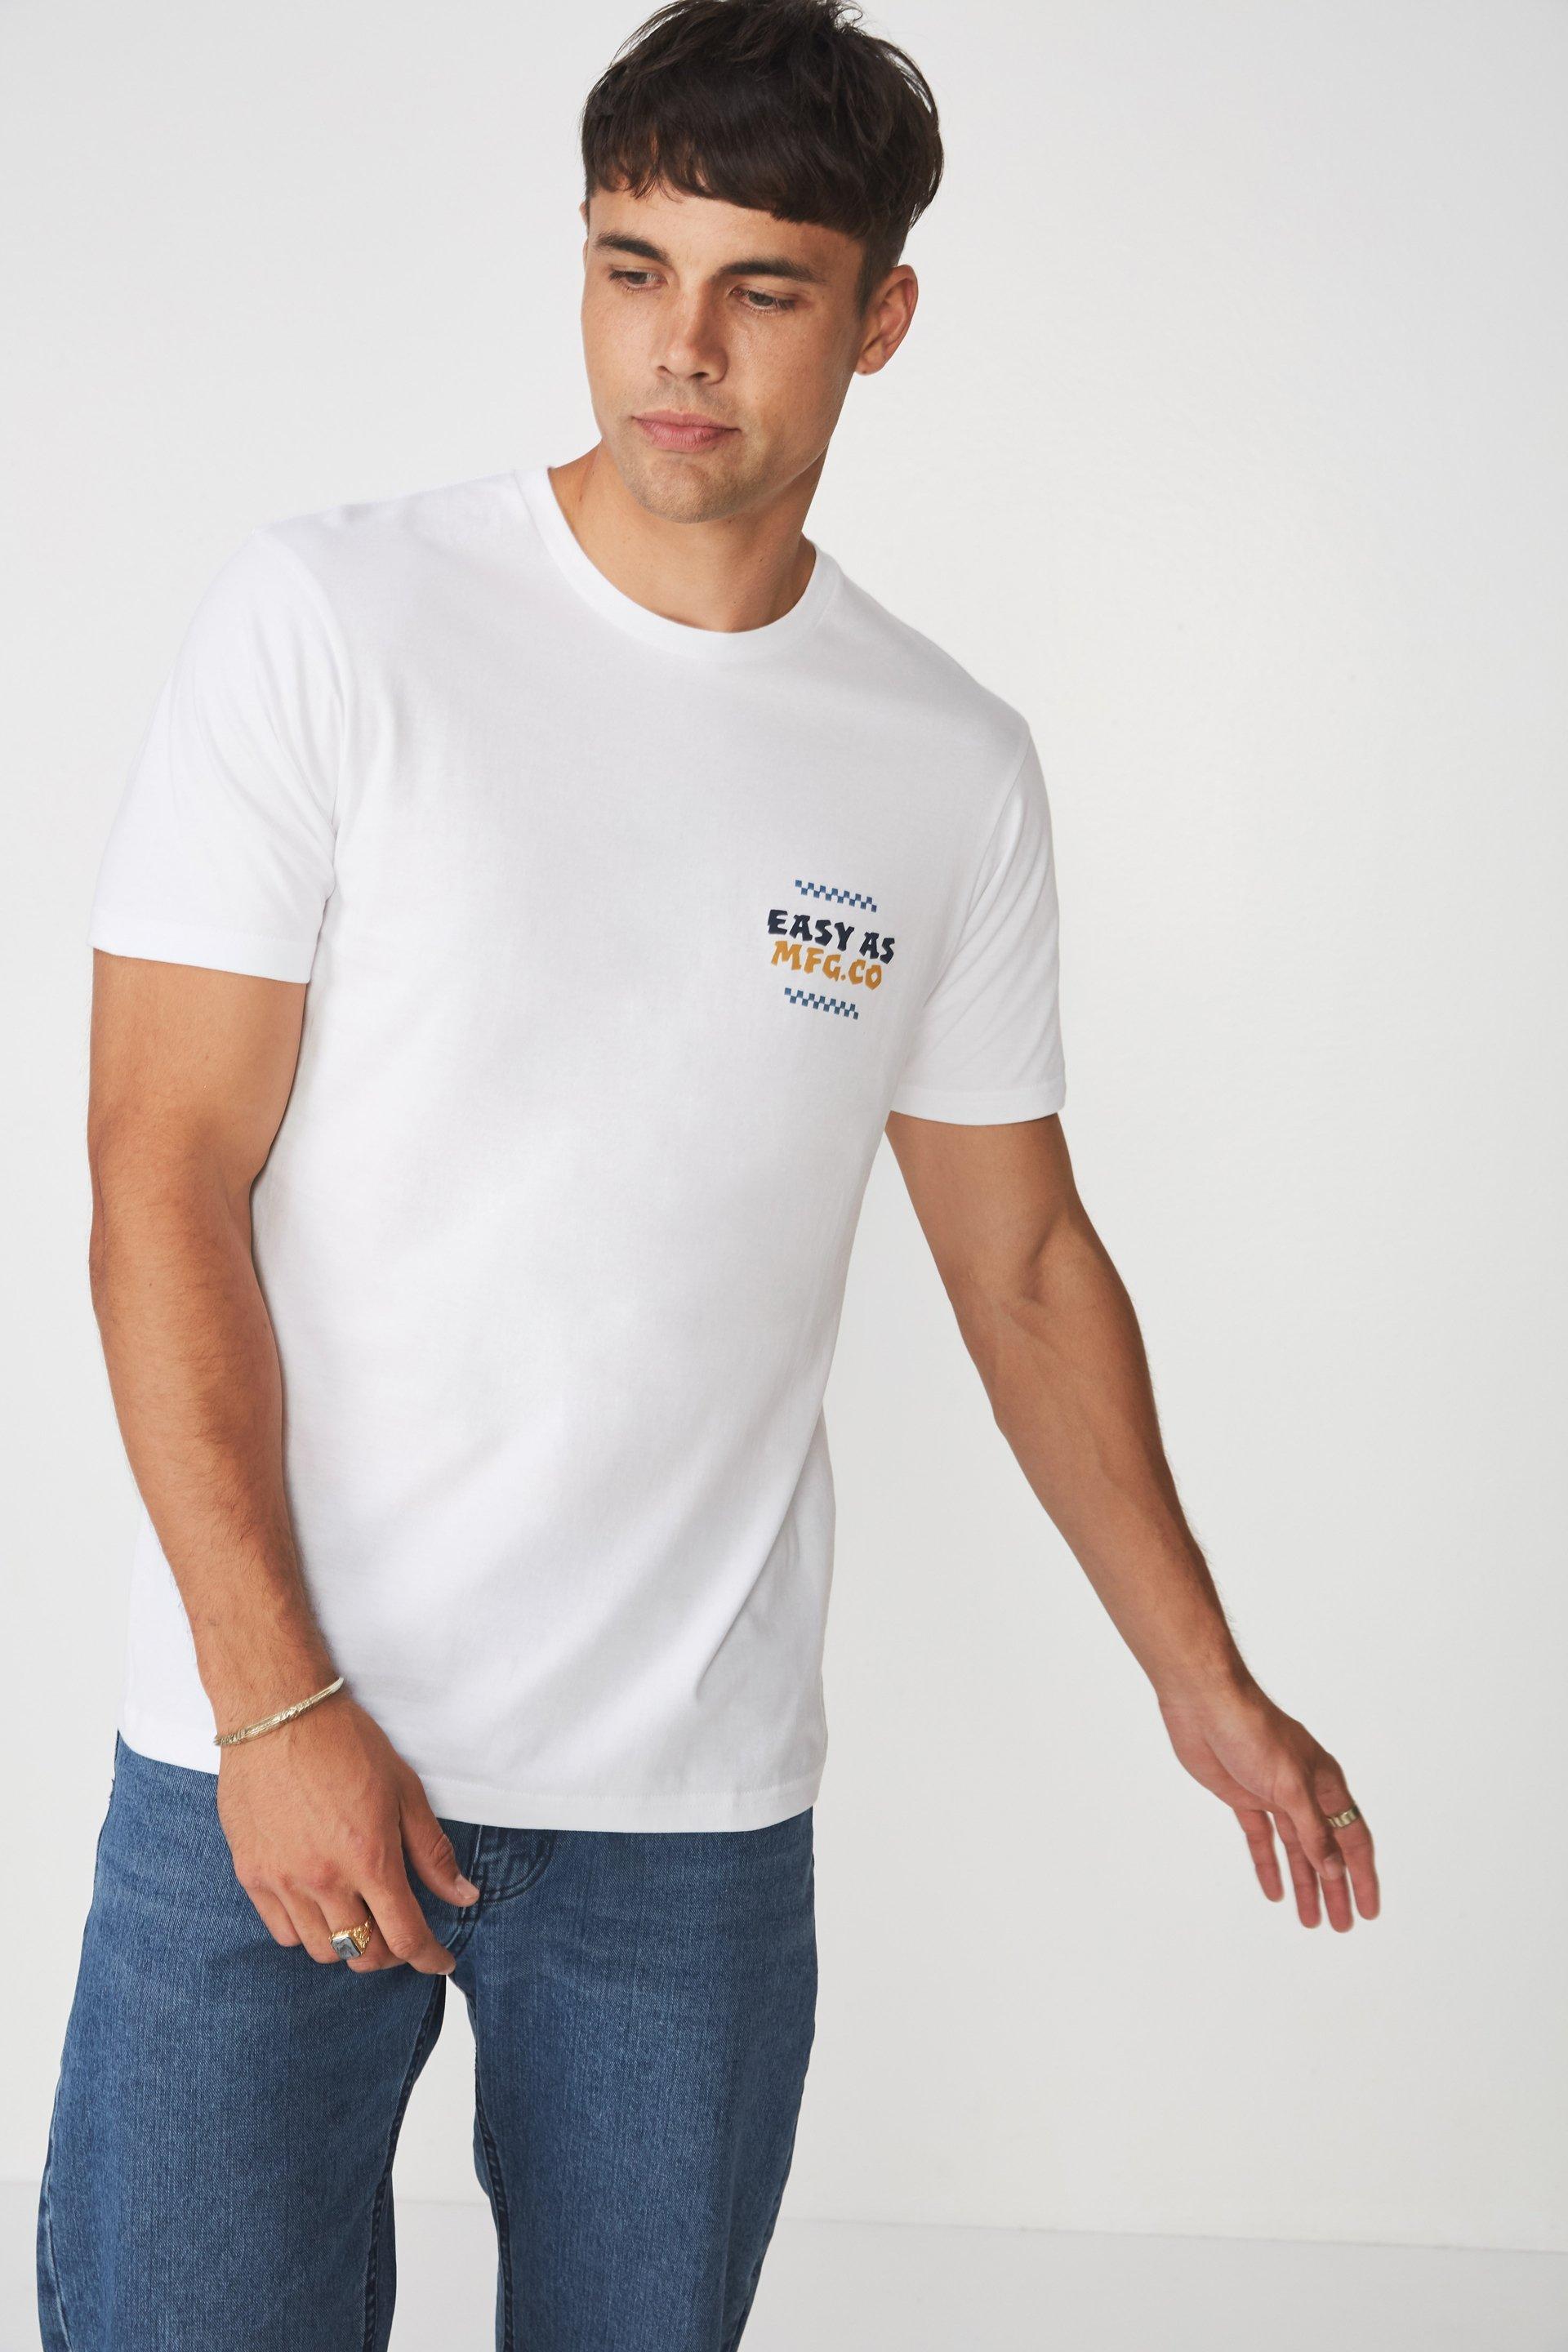 Easy mfc.co 2 Tbar tee - white Cotton On T-Shirts & Vests | Superbalist.com